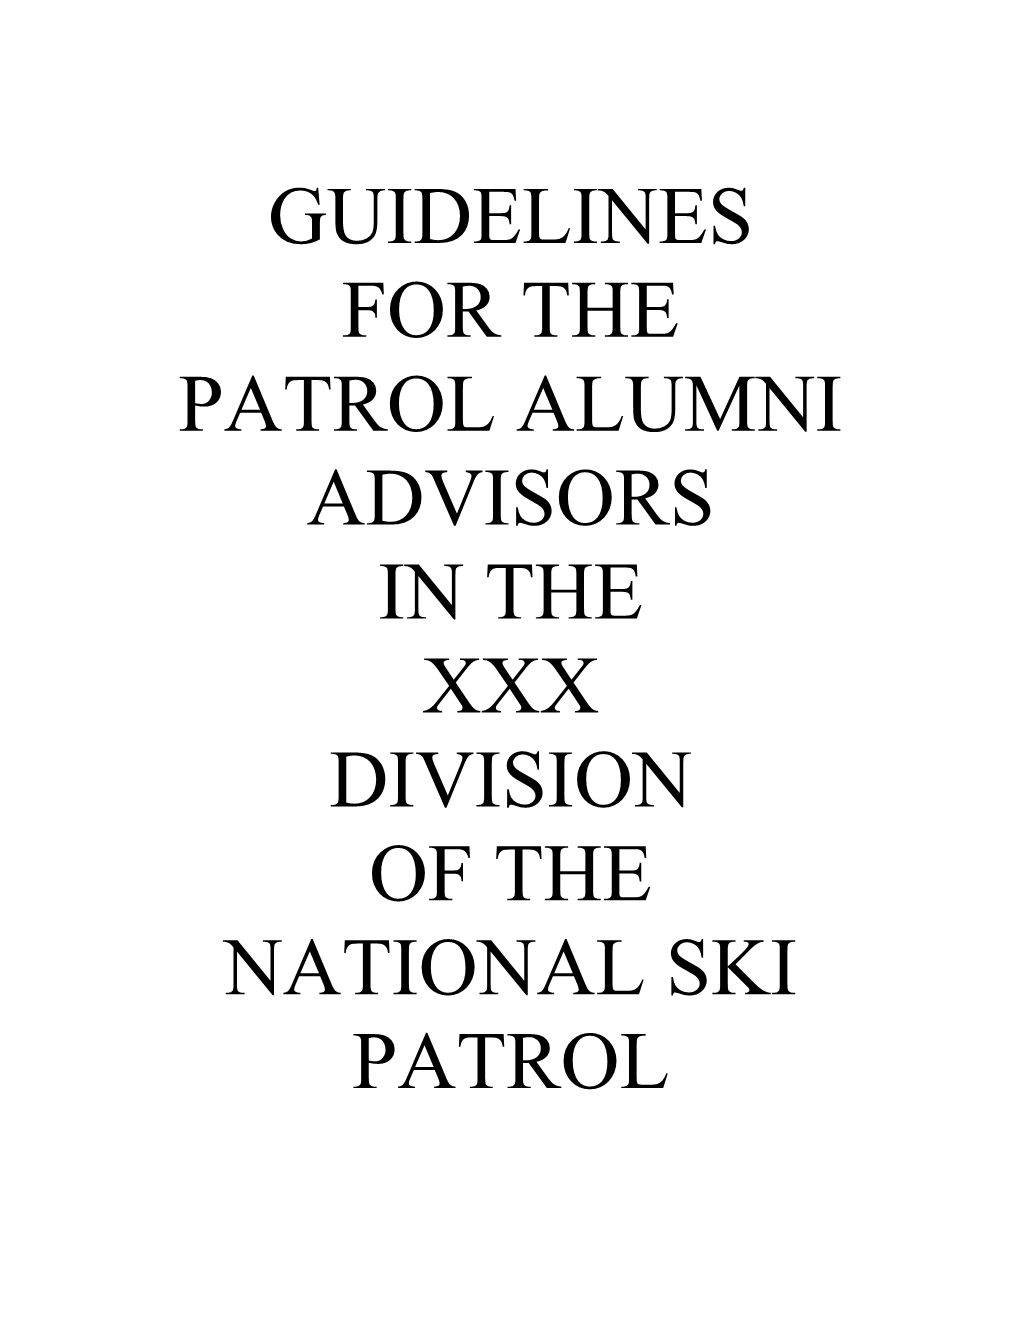 What Are the Duties of a Patrol Alumni Advisor ? 1